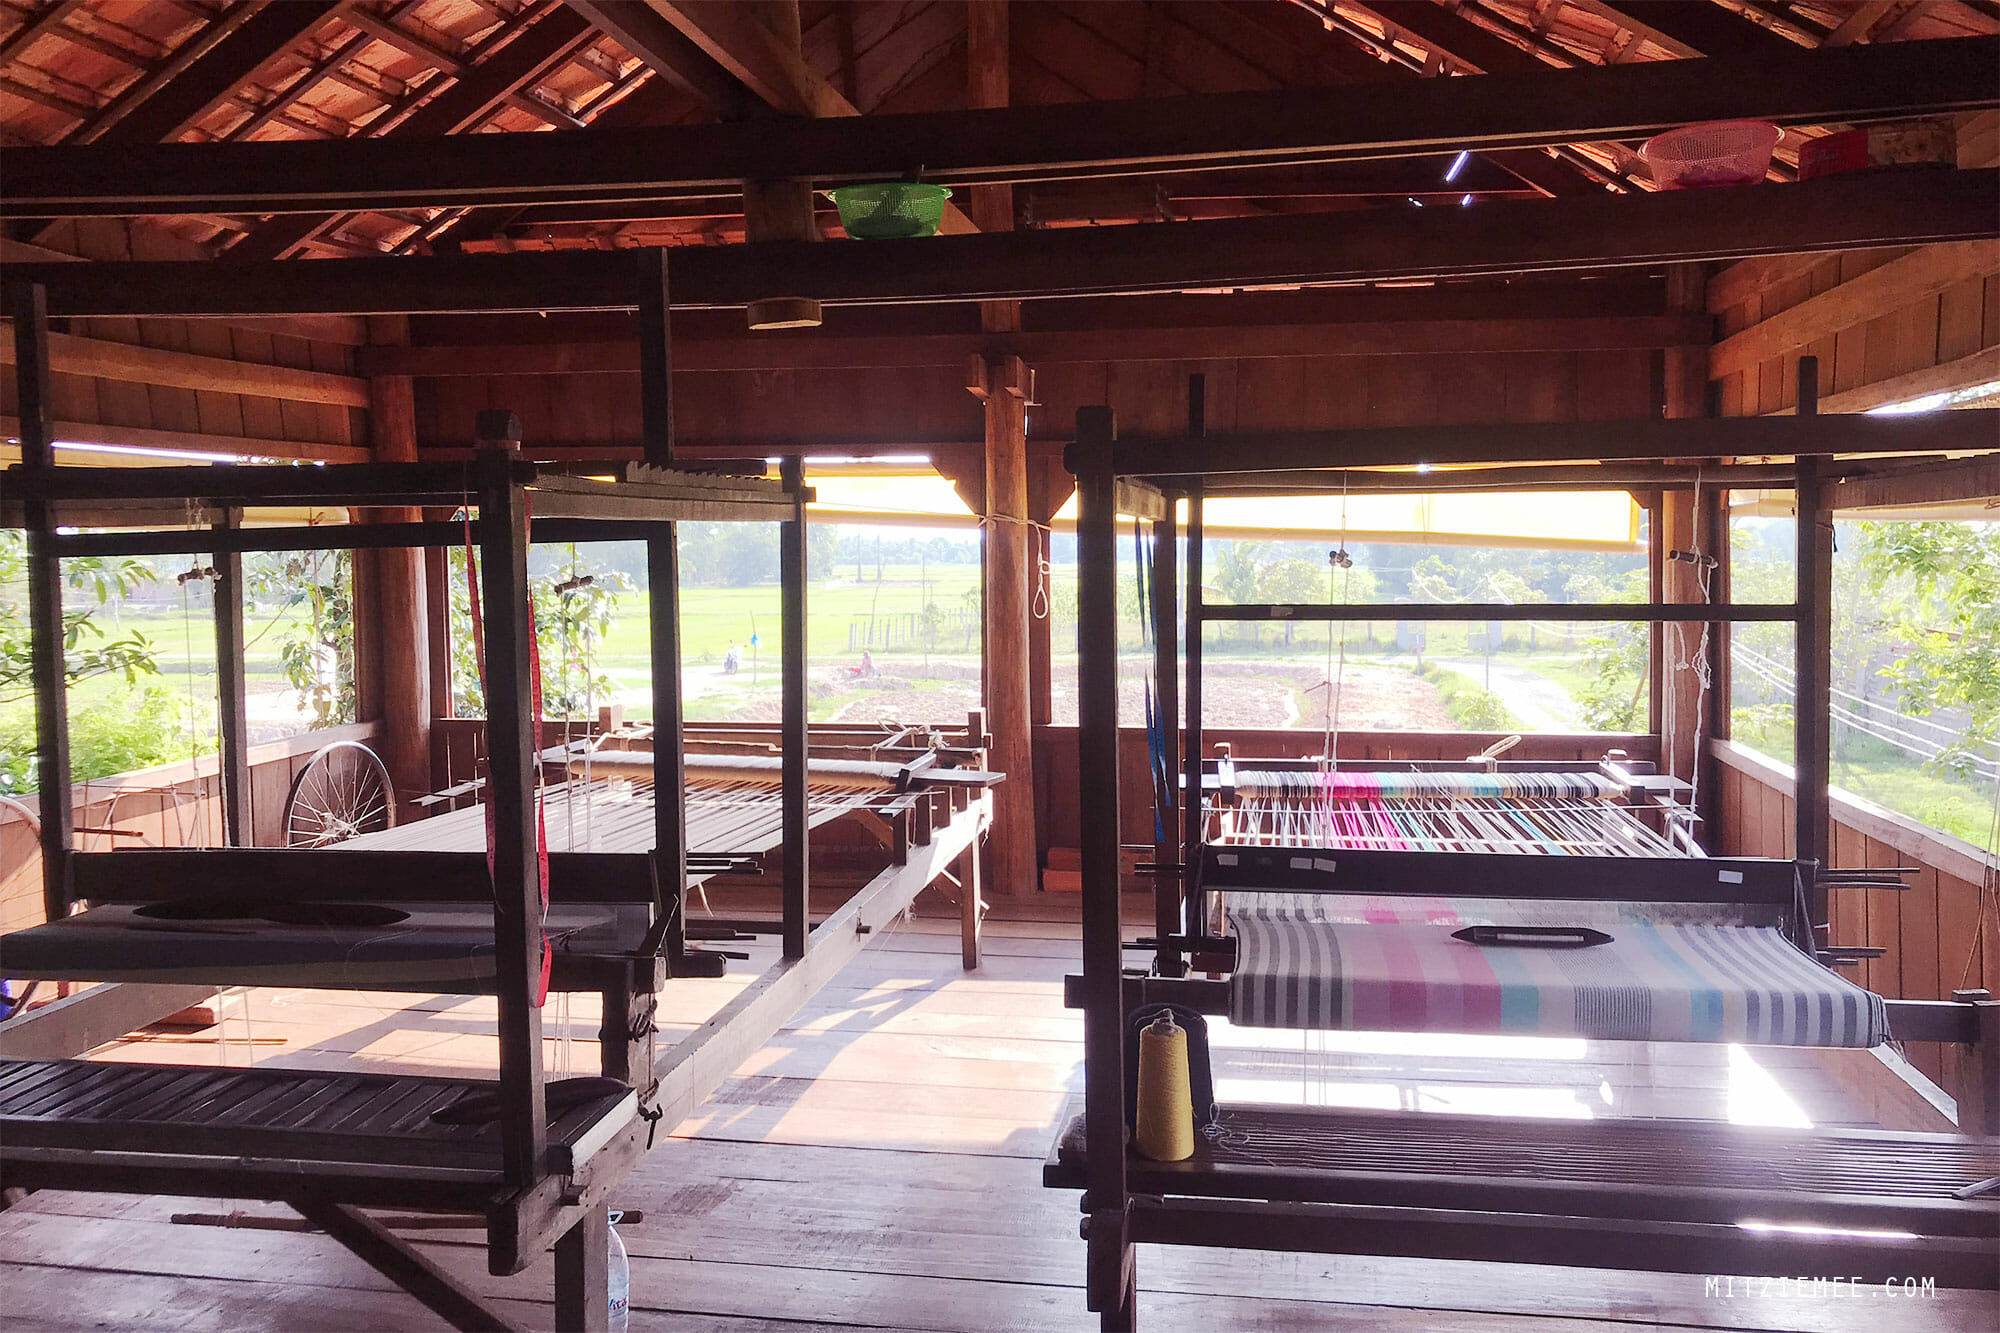 The looms at Weavers Project, Takeo, Cambodia